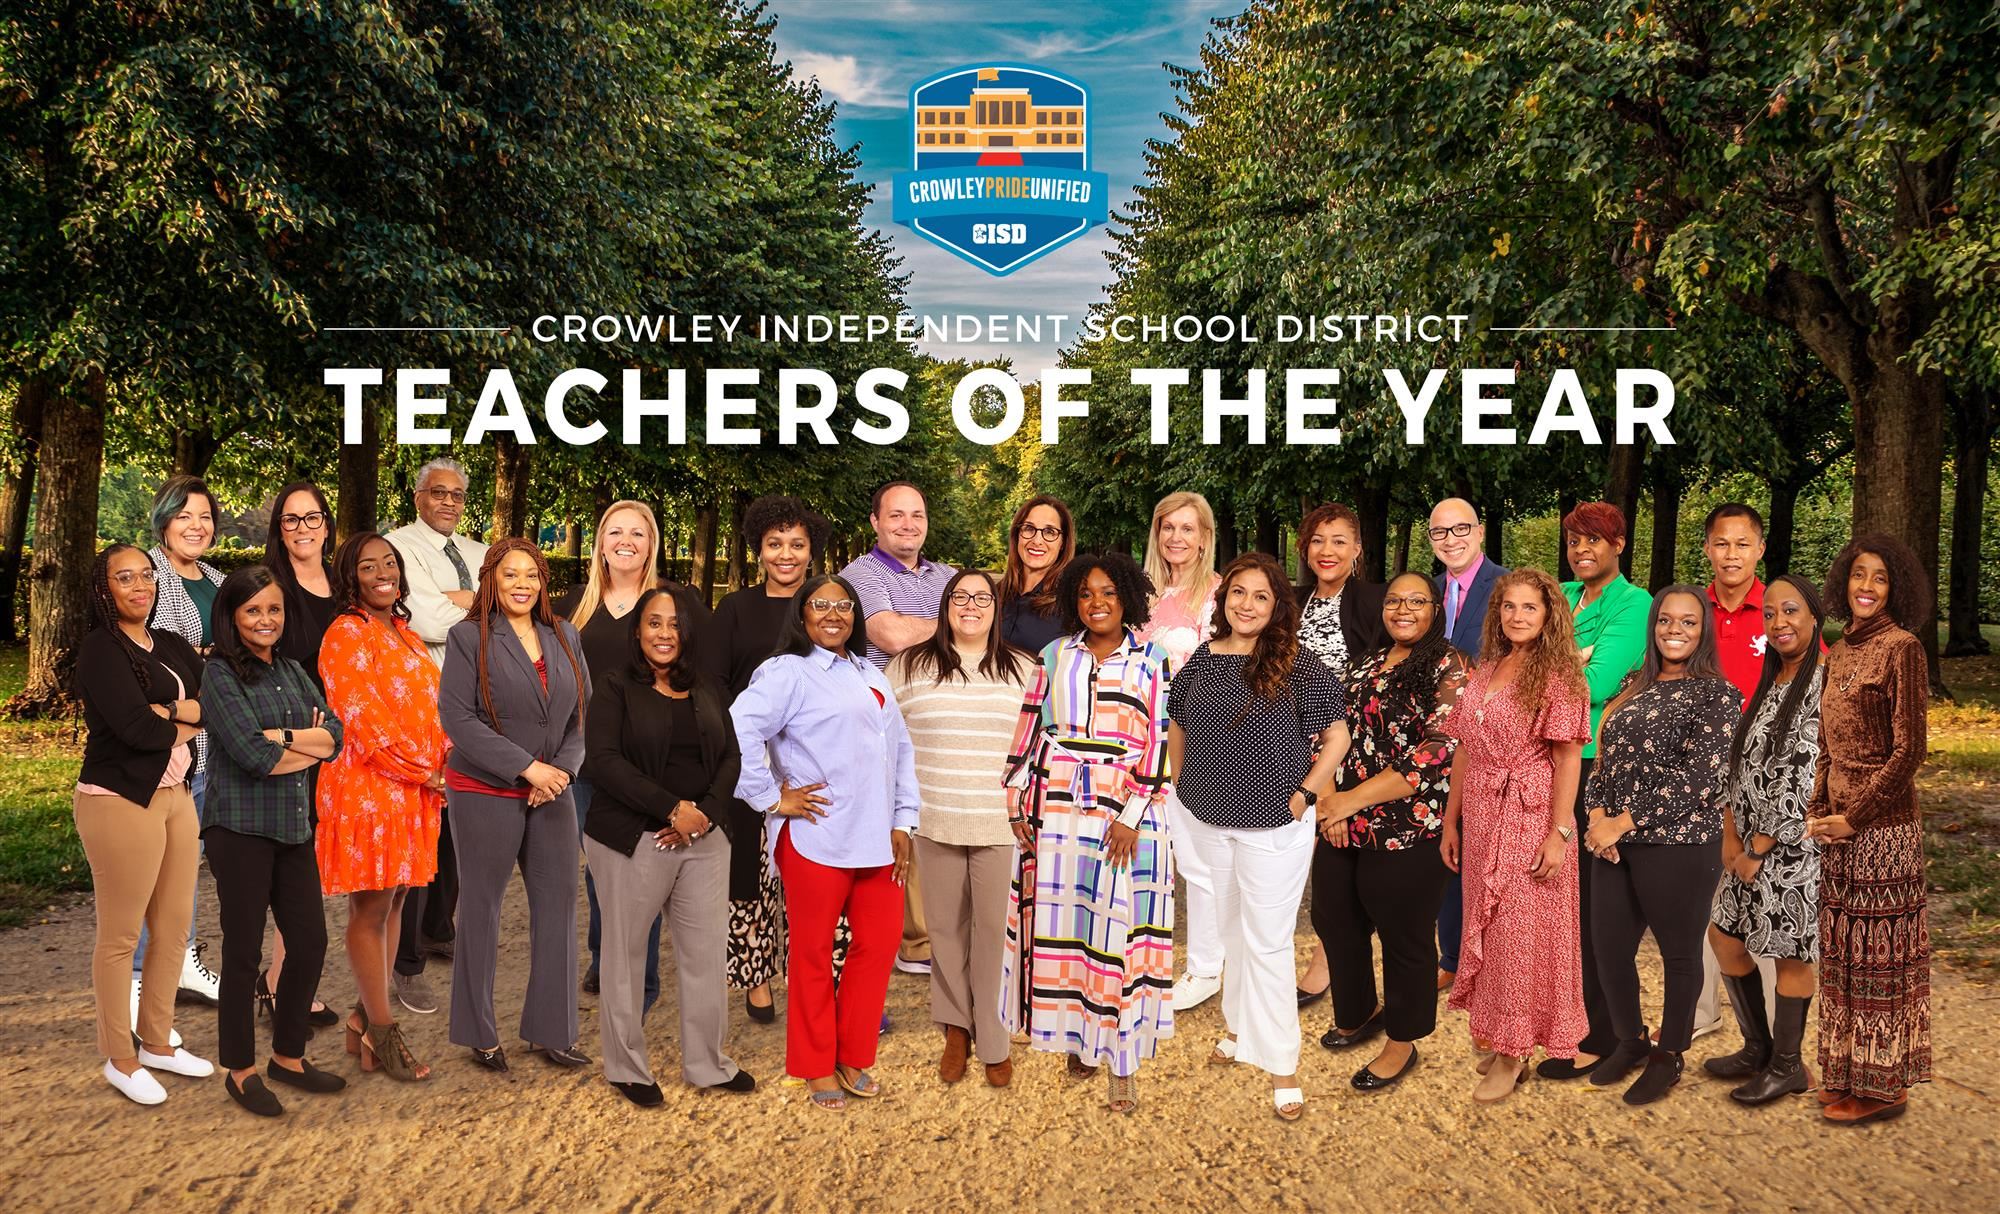 Crowley ISD Teachers of the Year group photo